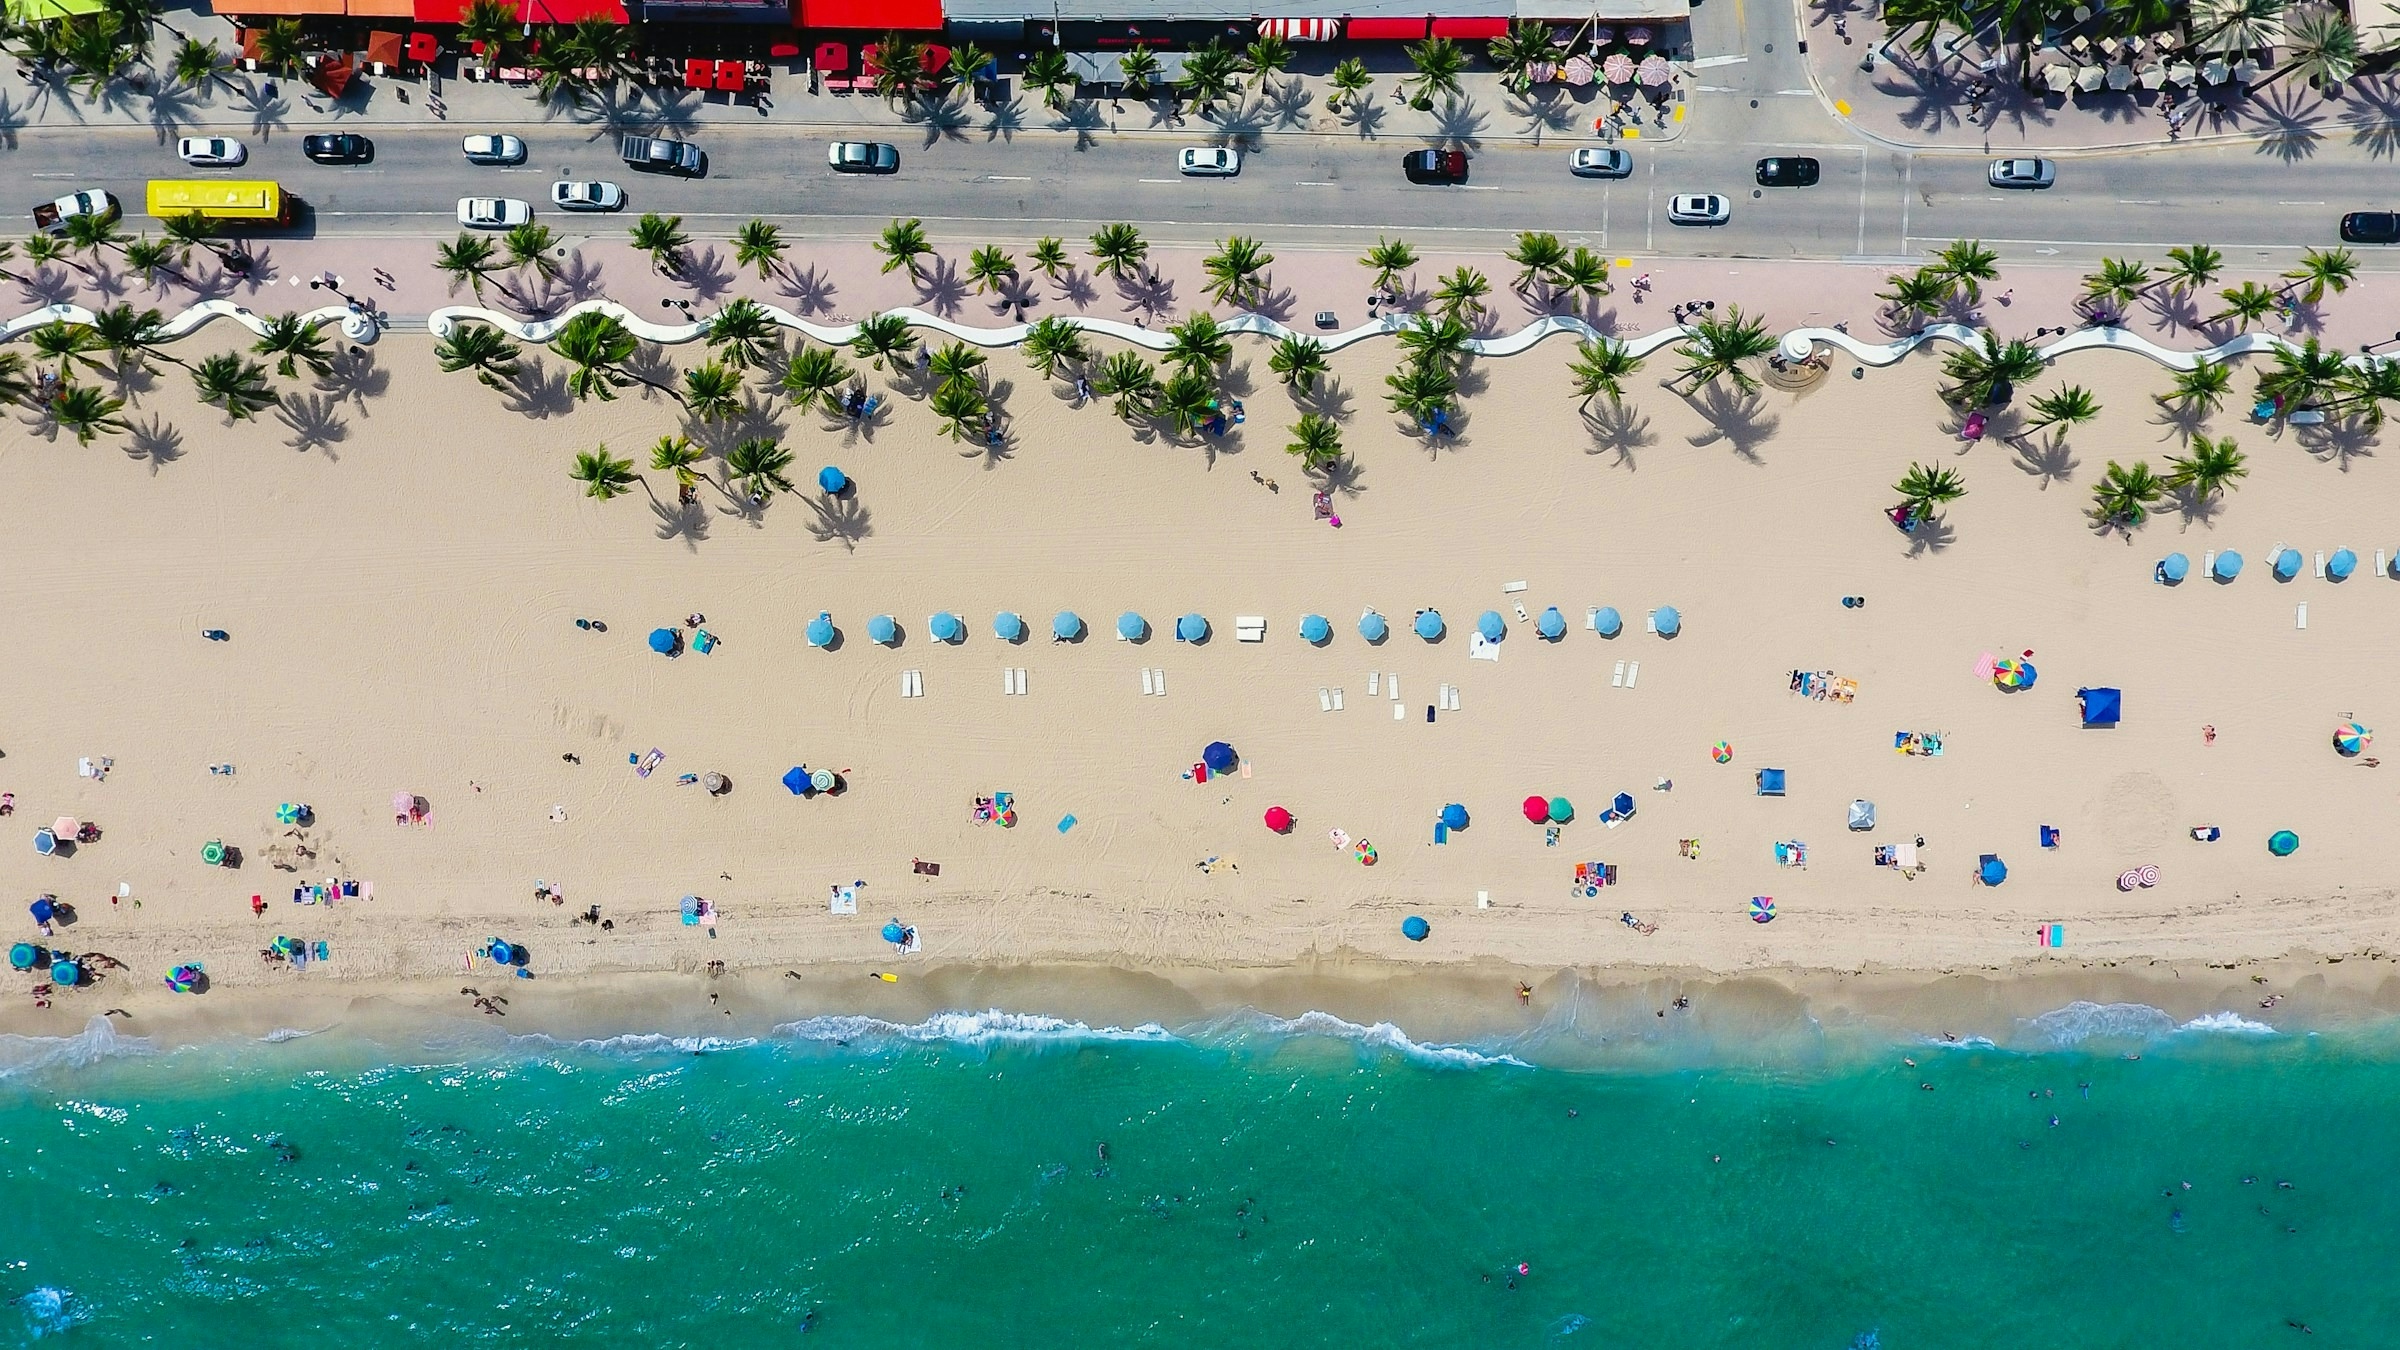 Birds-eye view of a beach, ocean, and busy street with cars. The beach has different colored umbrellas and palm trees.